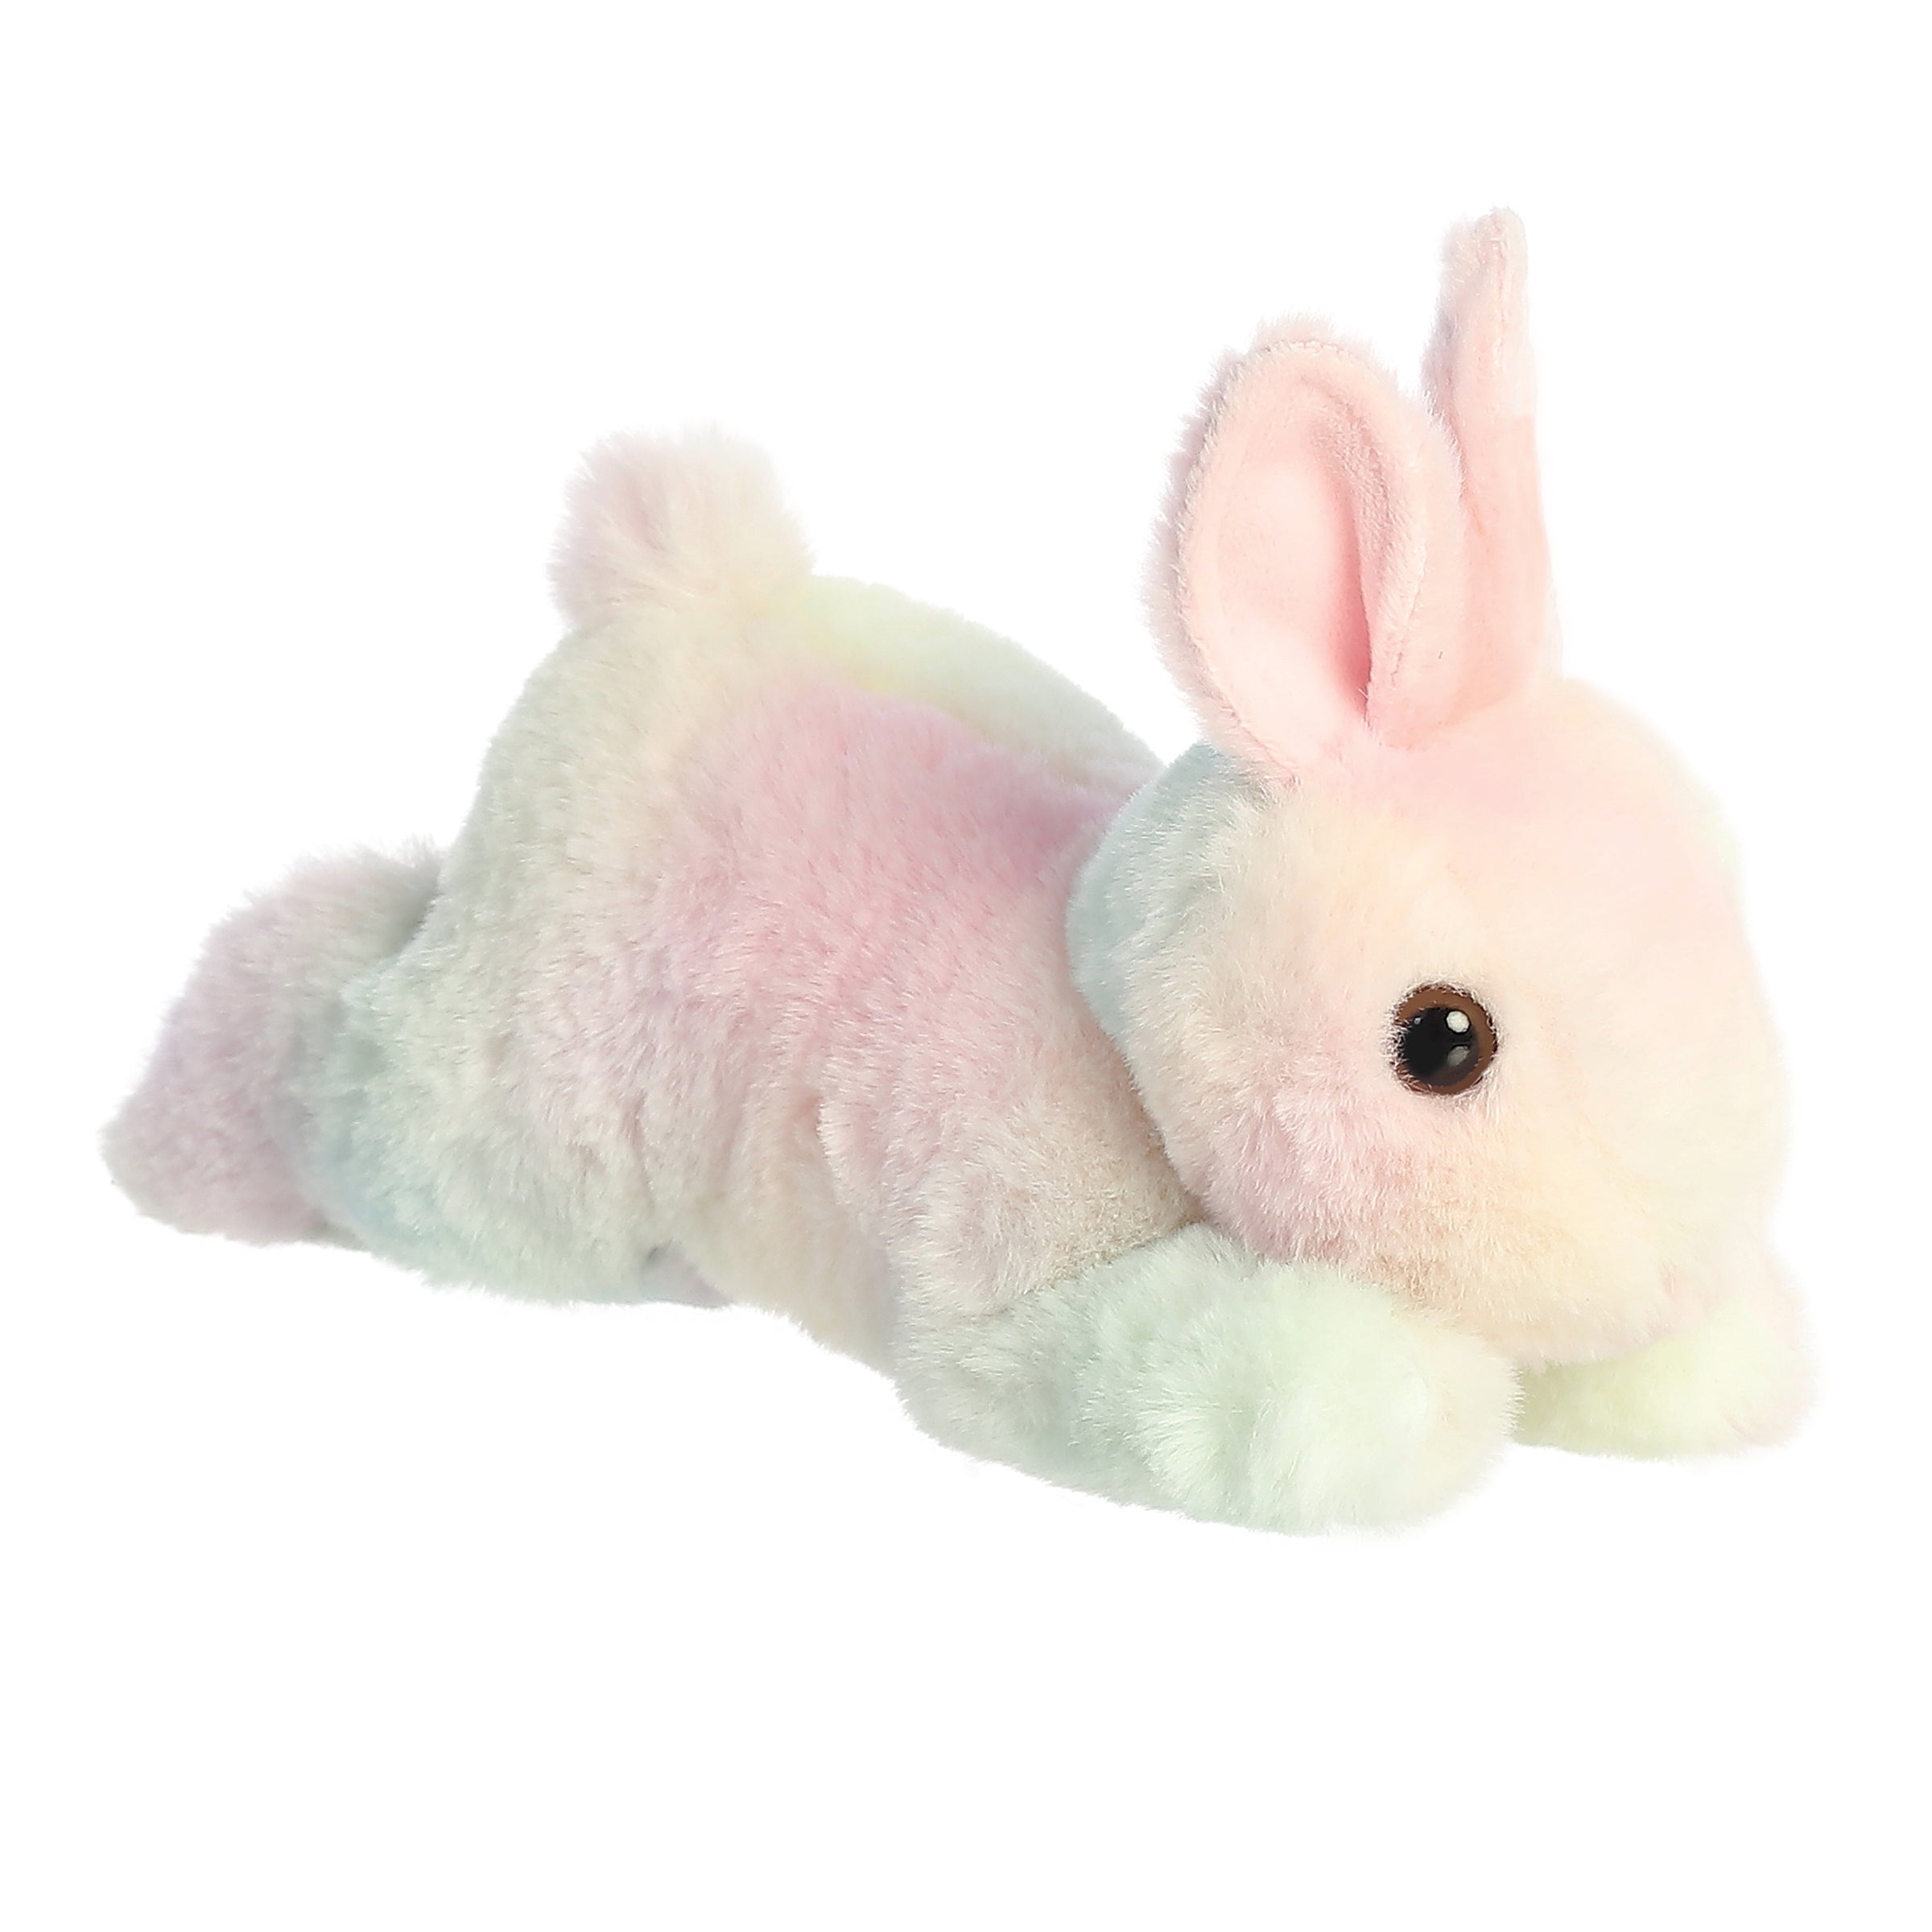 An adorable Mini Flopsie bunny plush that is available in pastel, lavender, or mint!